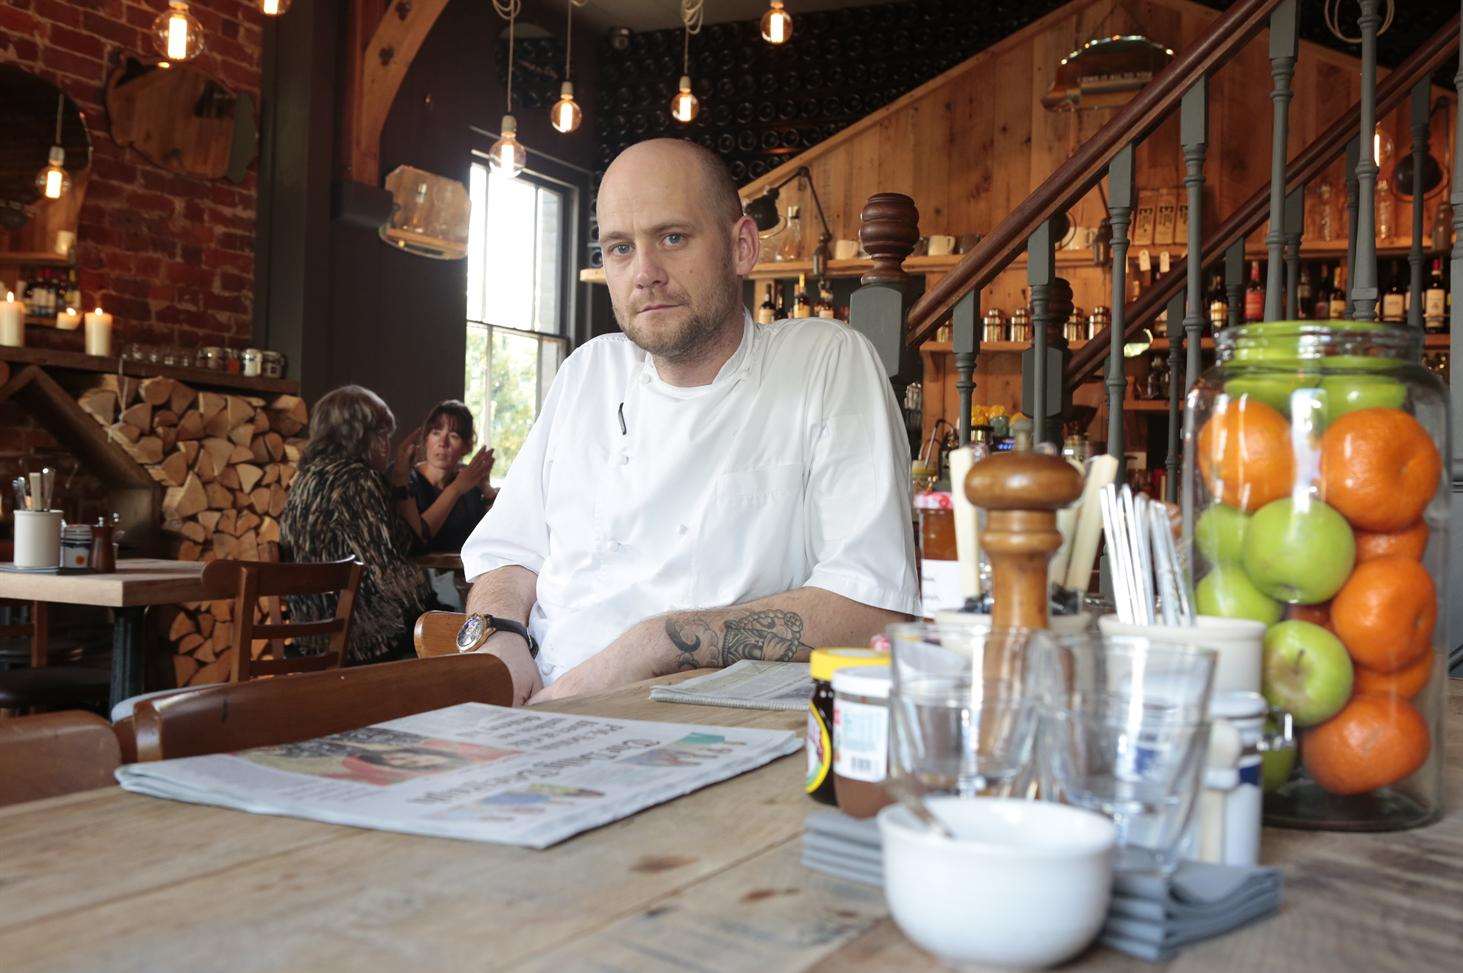 Scott Goss used to be head chef at The Swan in West Malling has opened Twenty Six at Tunbridge Wells